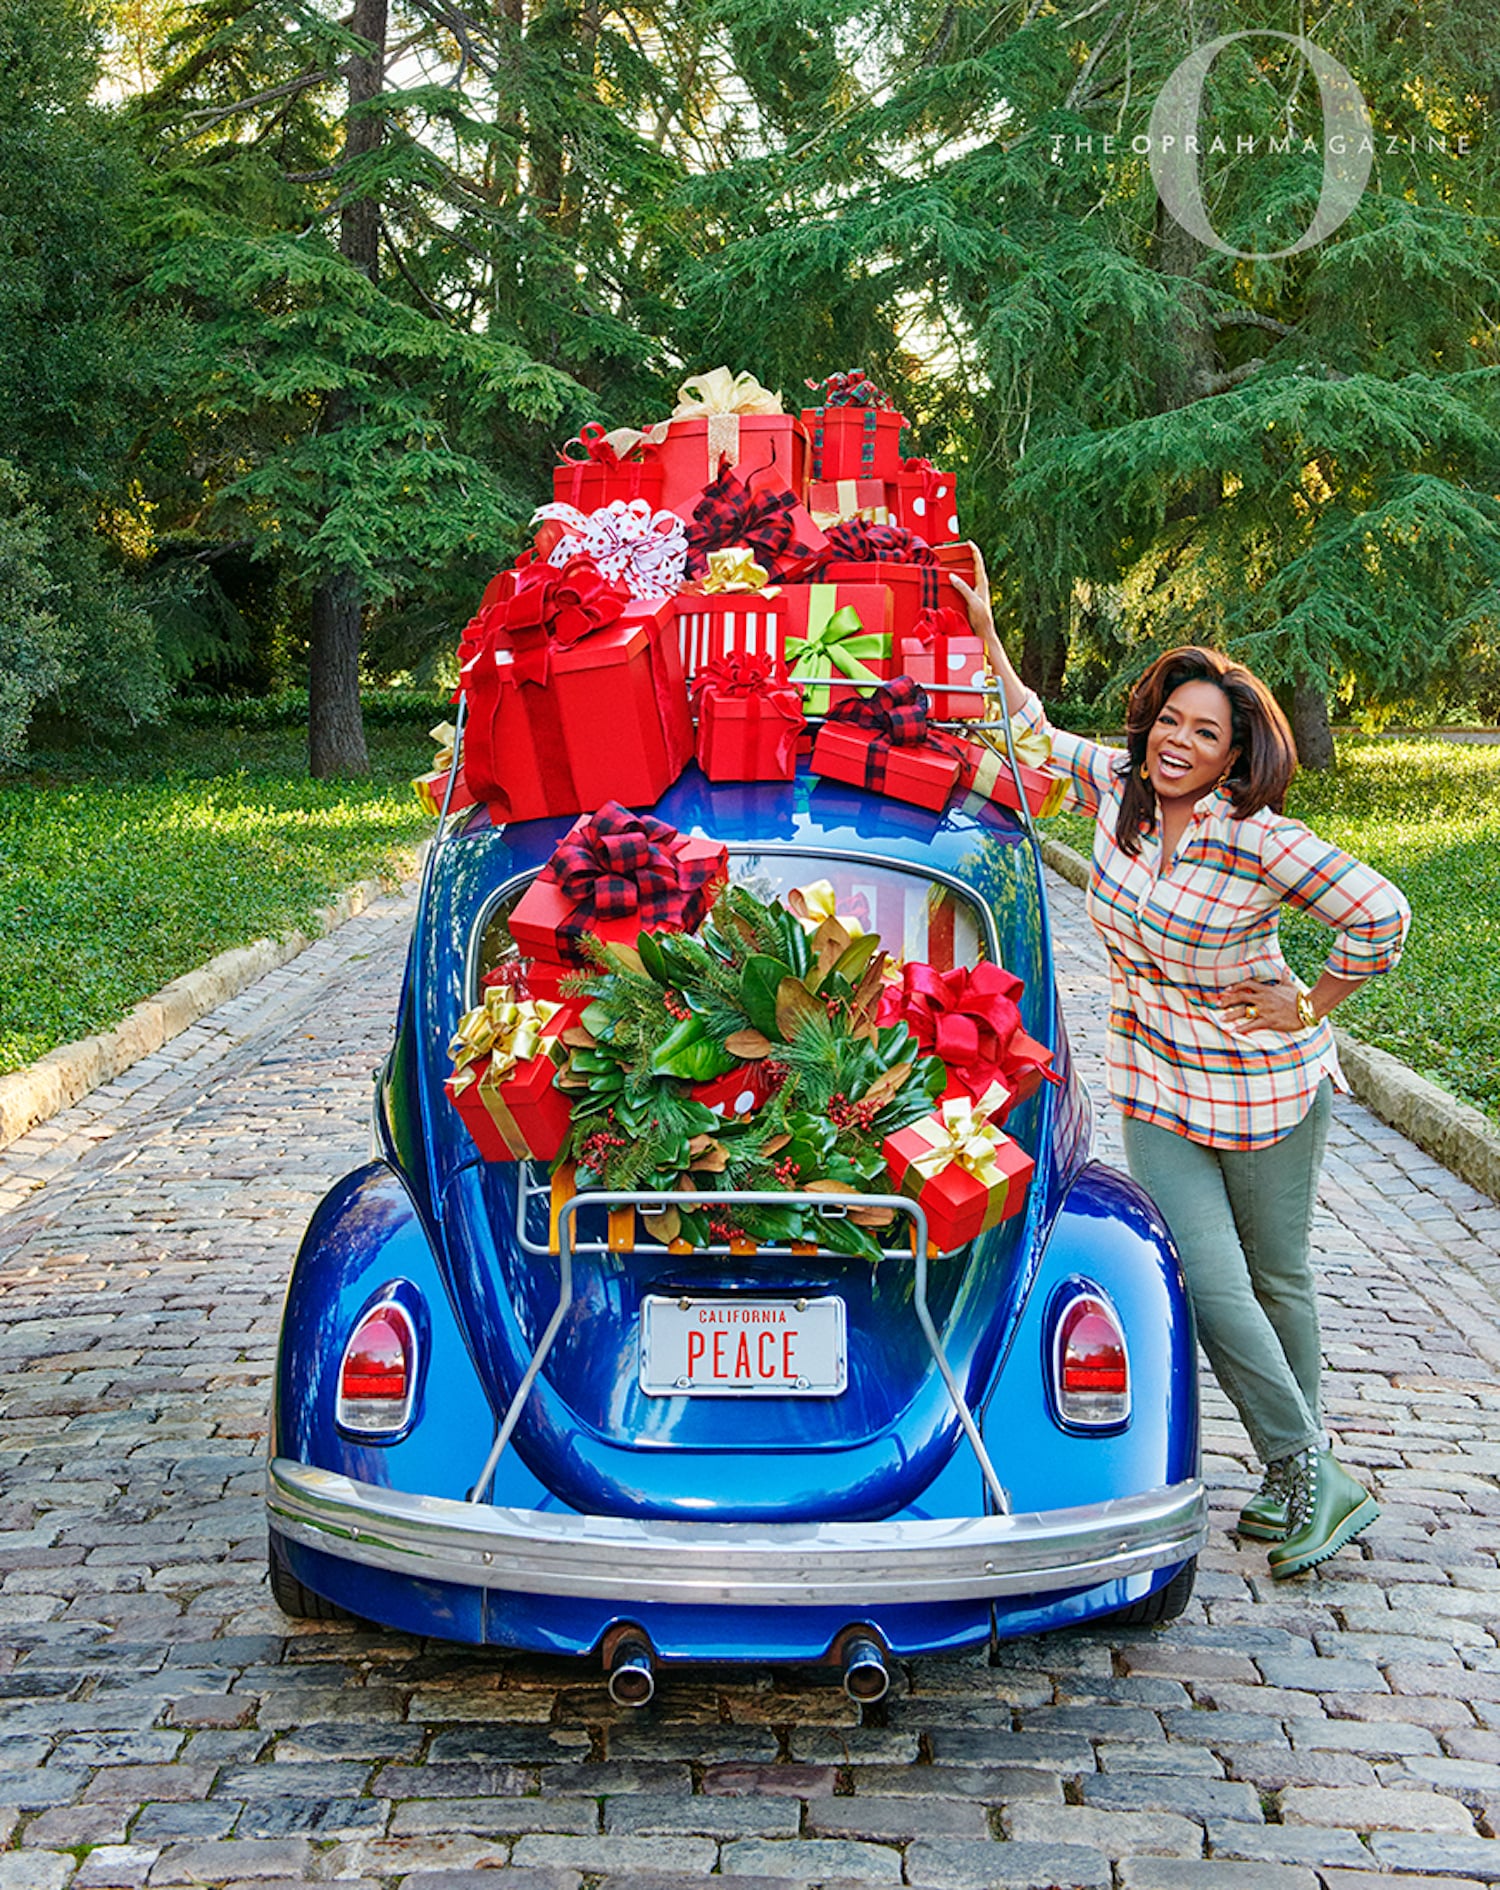 13 of Oprah's Favorite Things That Are on Sale for Under $50 at